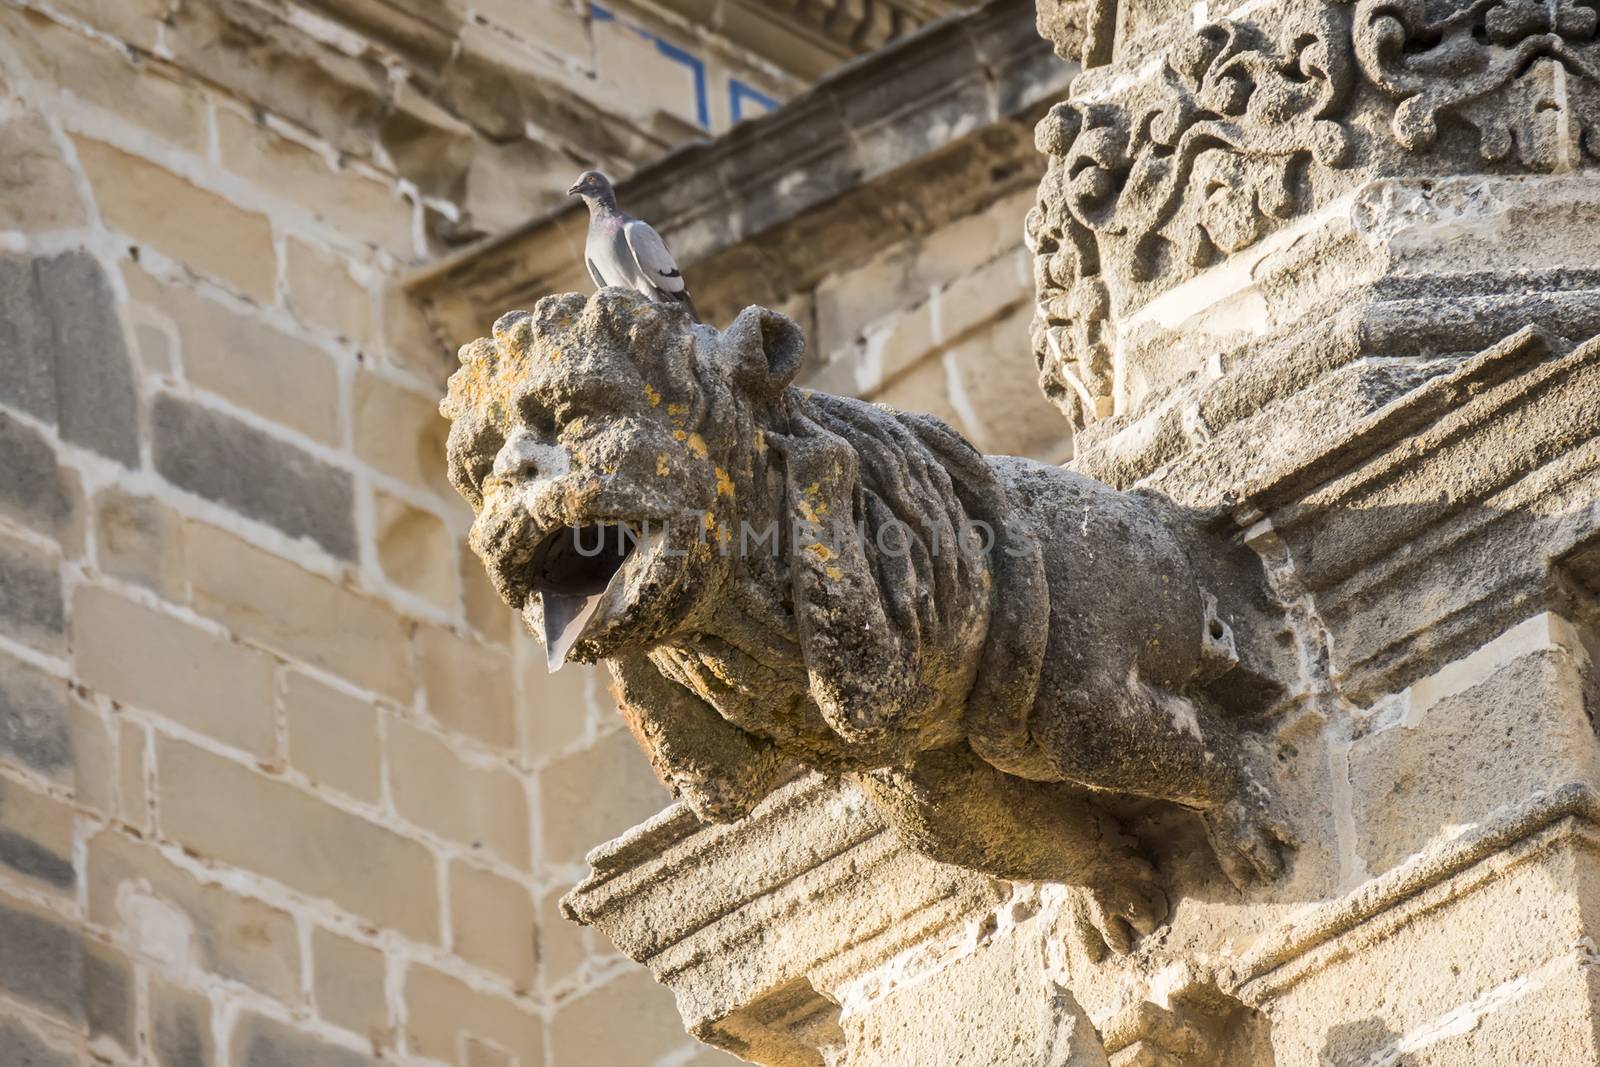 Gargoyle protruding from the facade of a cathedral